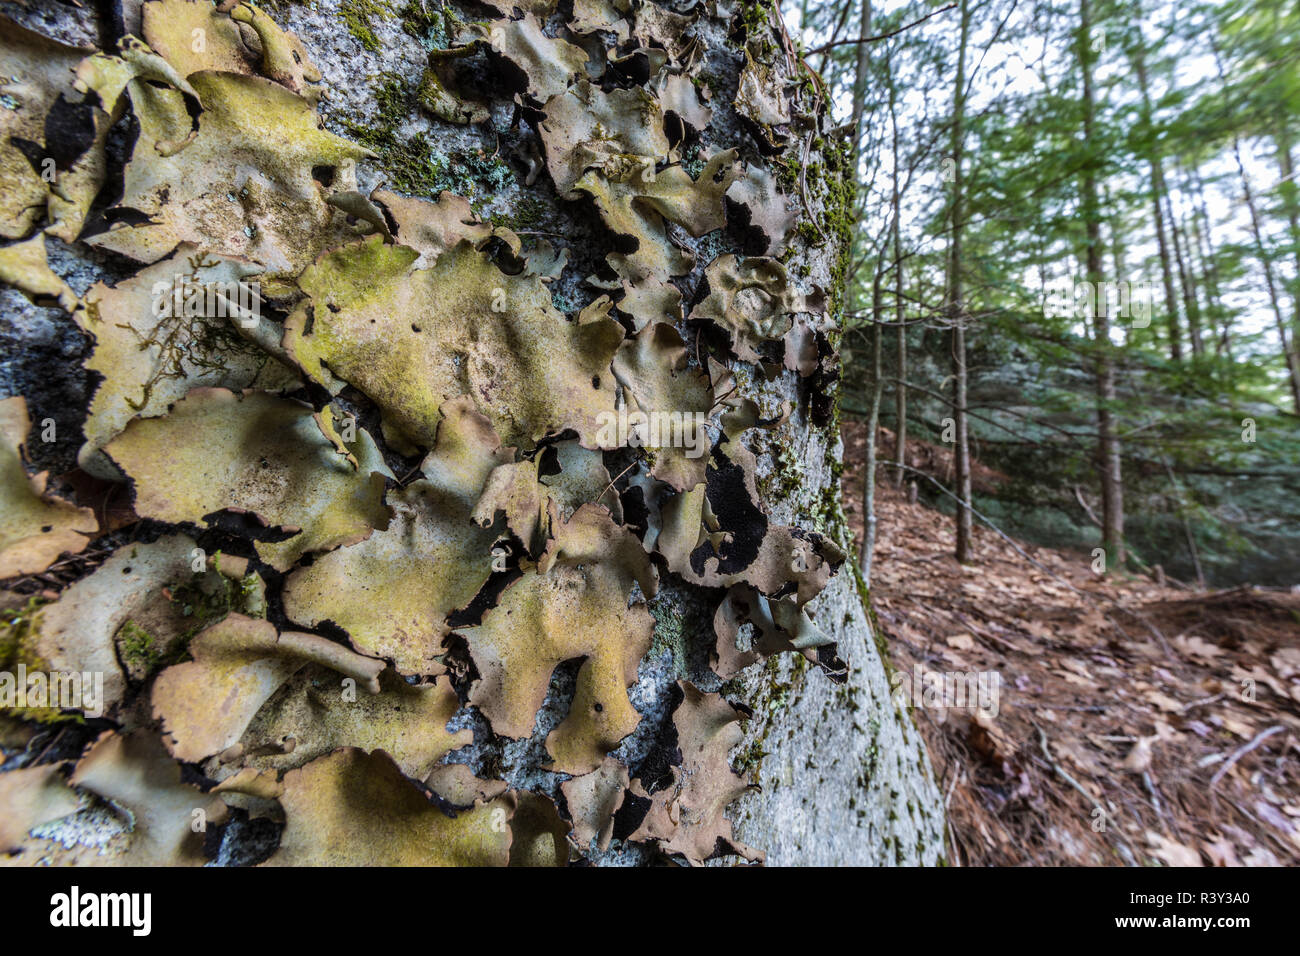 Rock tripe lichen, Umbilicaria, on a boulder in a forest in Barrington, New Hampshire. Stock Photo